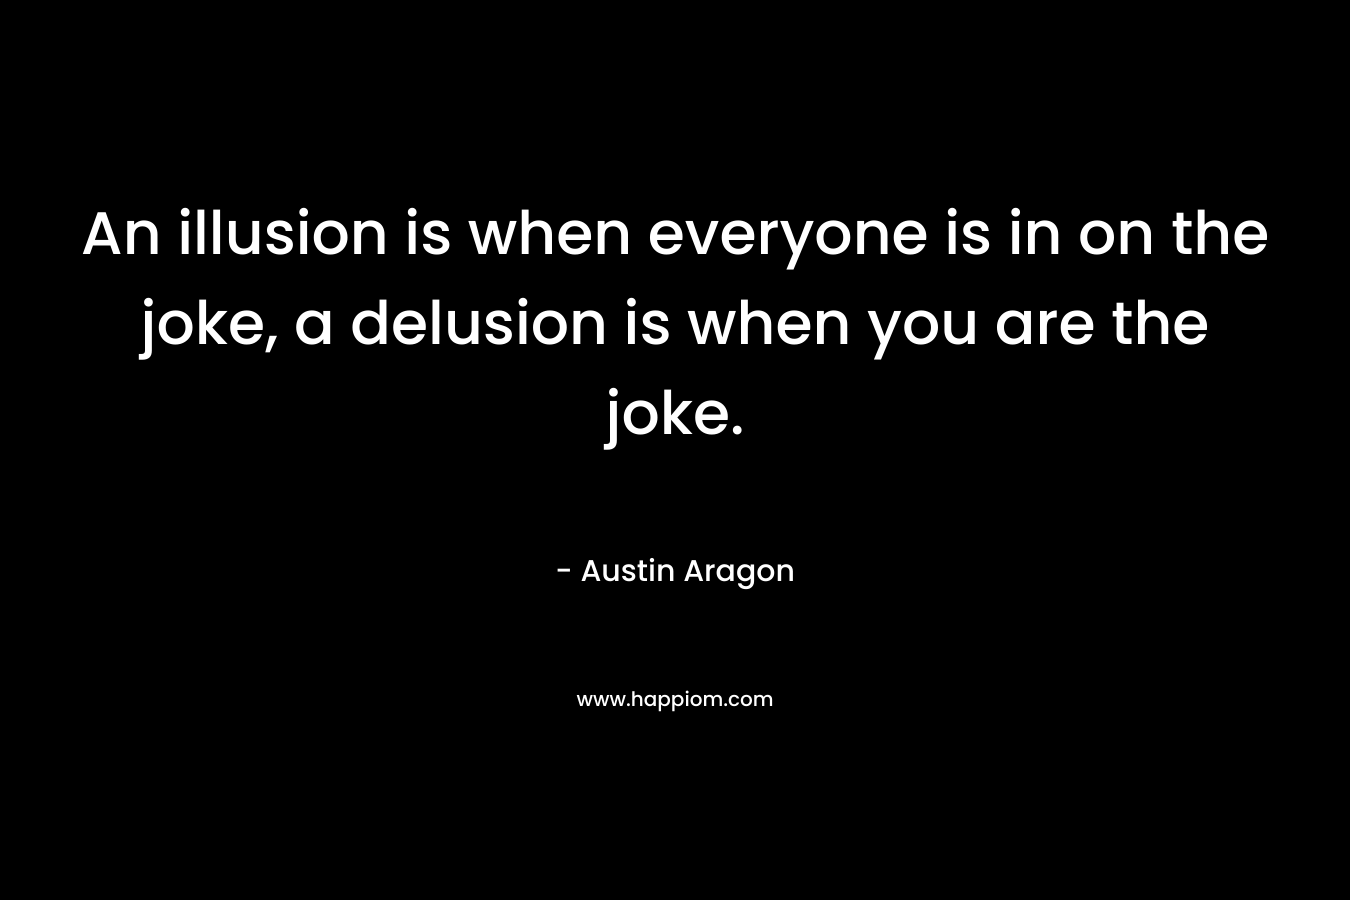 An illusion is when everyone is in on the joke, a delusion is when you are the joke.